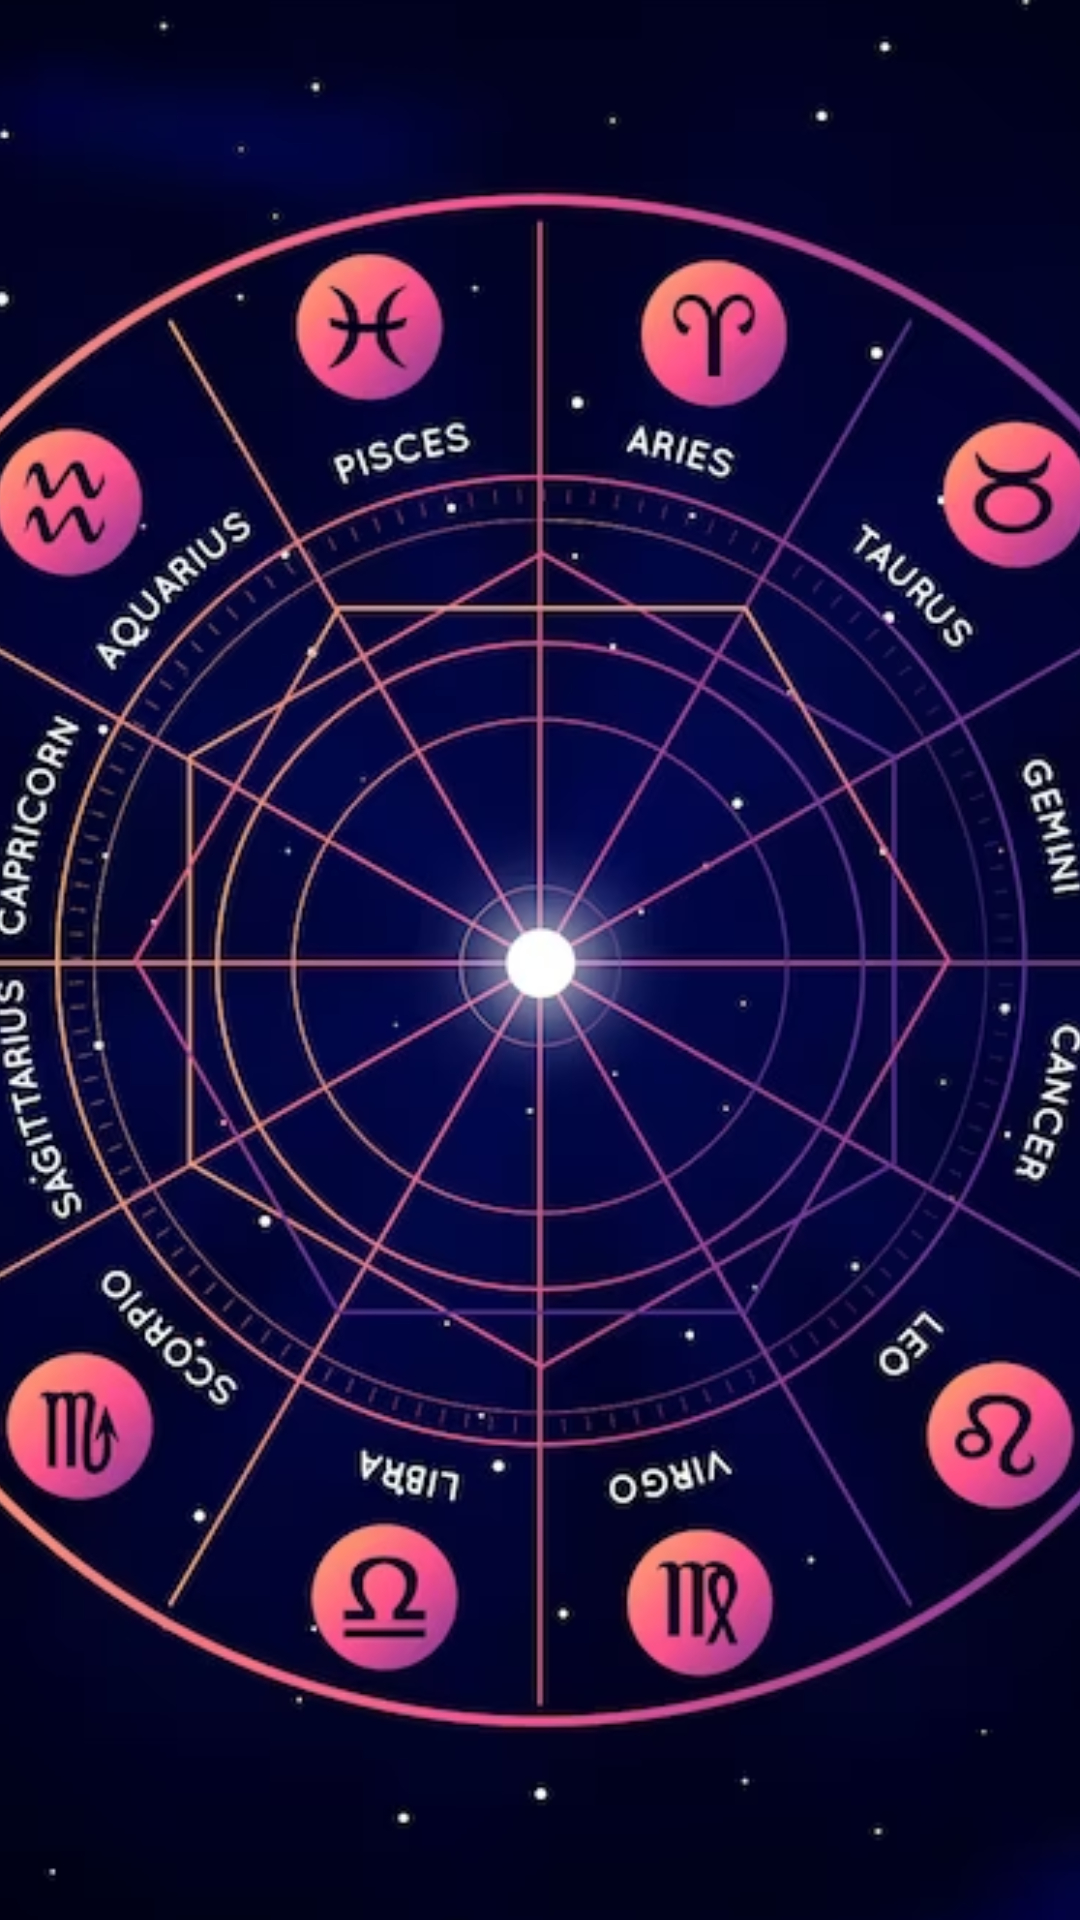 Know lucky colour, number for all zodiac signs for horoscope March 5